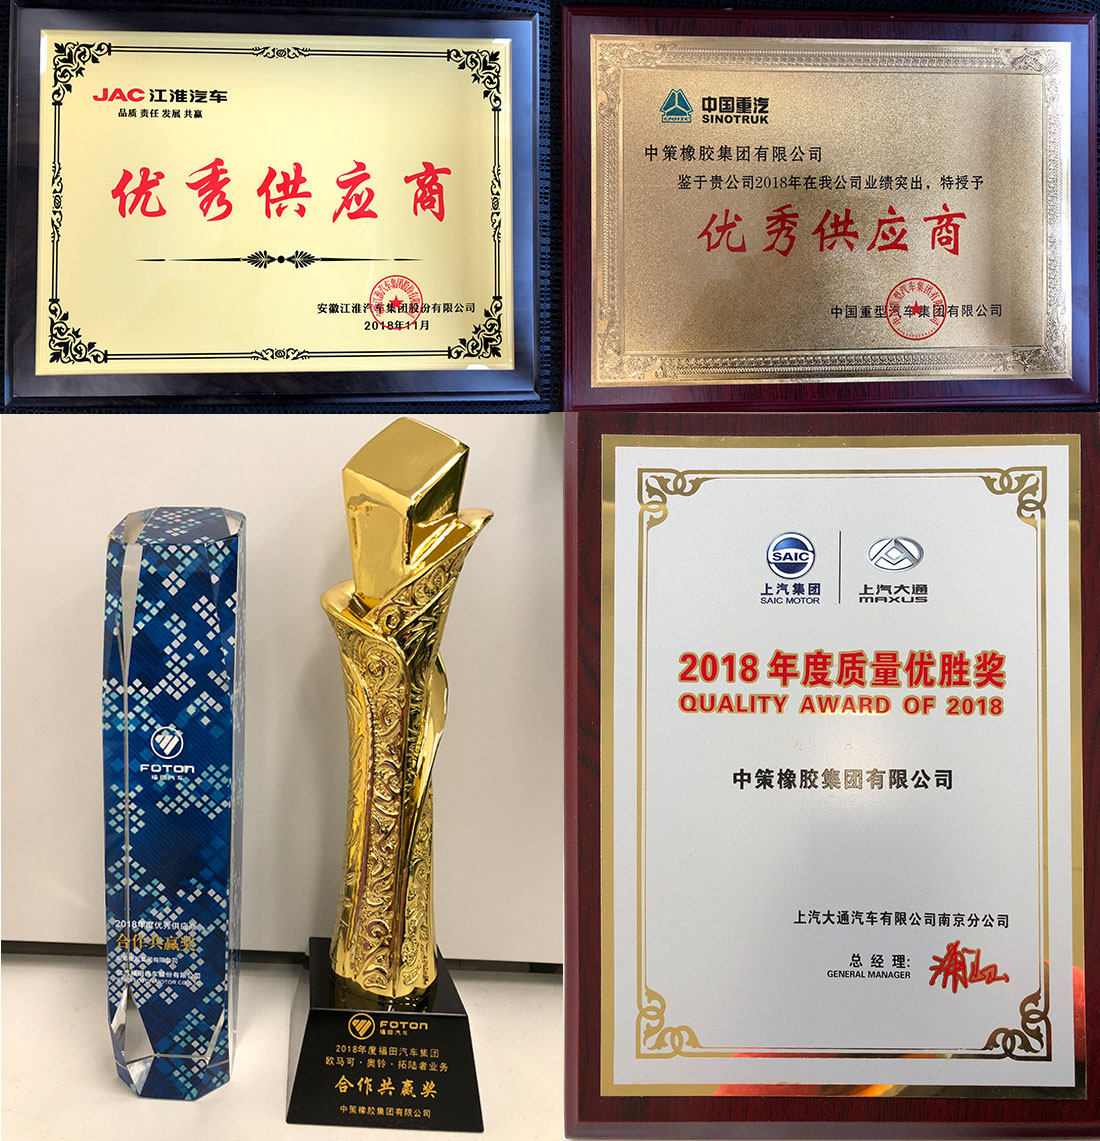 ZC Rubber received the excellent supplier awards